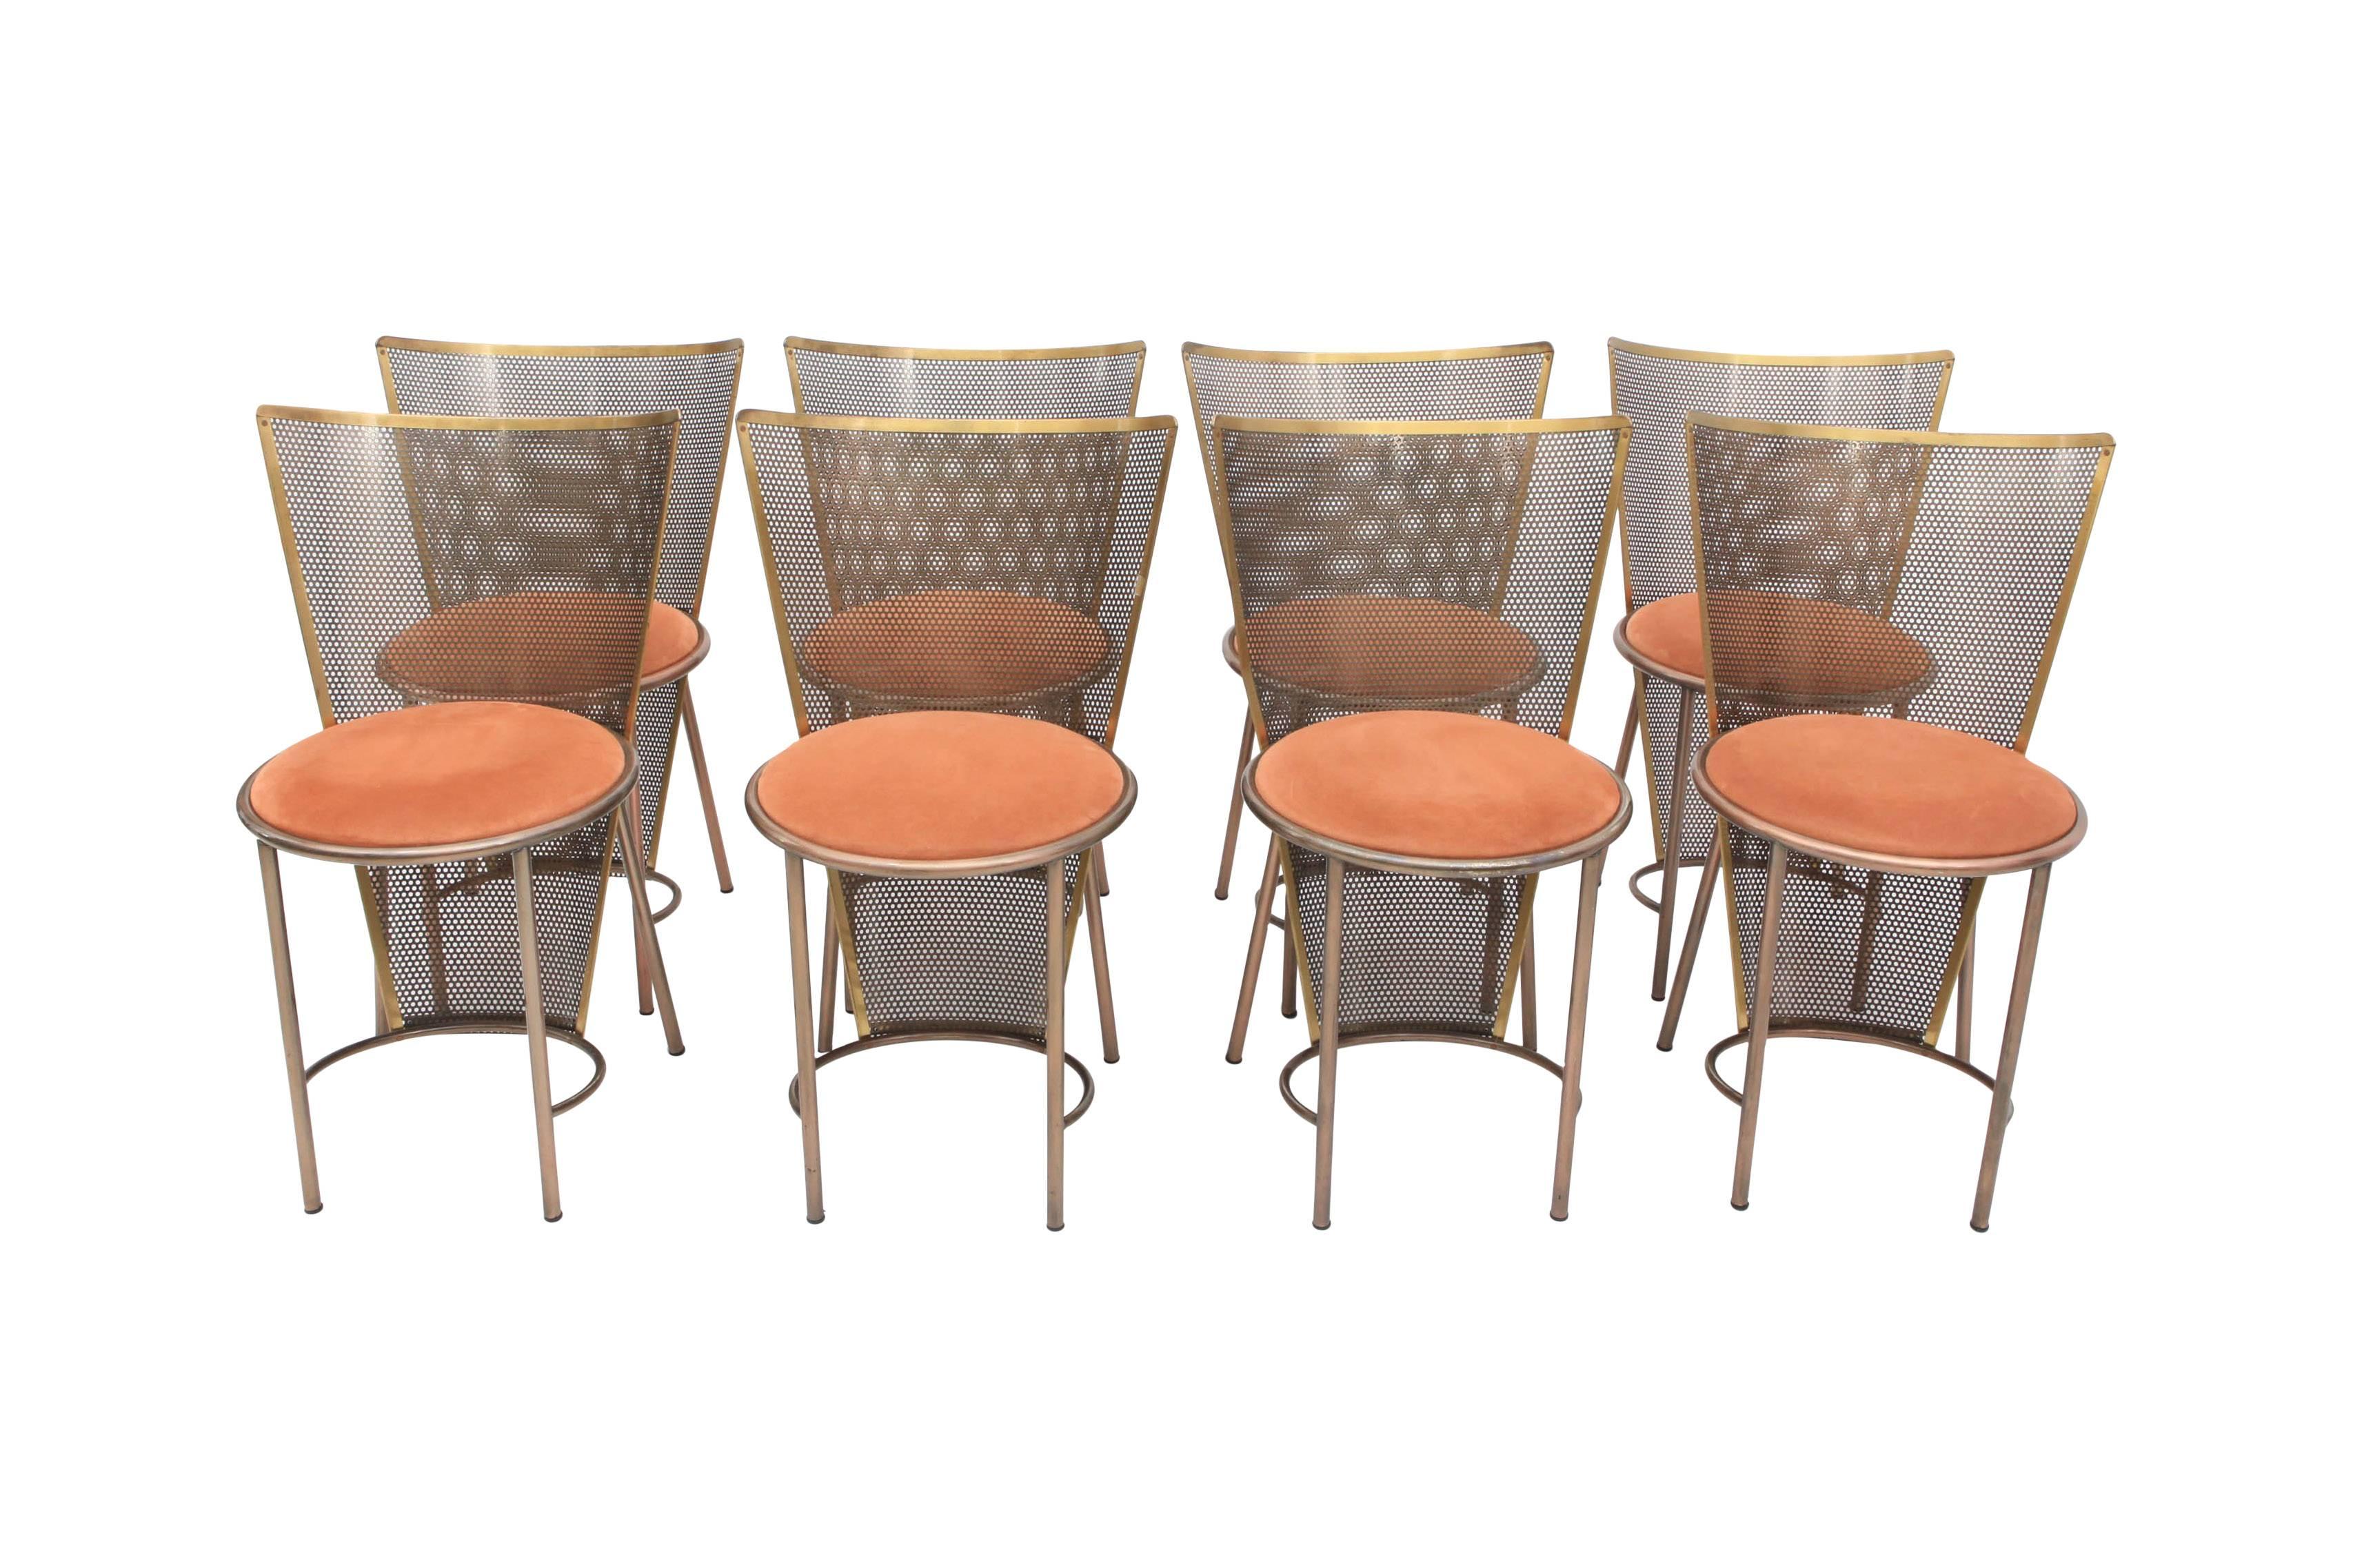 Extremely rare set of 12 chairs exhibited at the Belgian Pavillion in the Sevilla '92 world expo.
Manufactured by BelgoChrom, designed by Frans Van Praet.

Bronze patinated metal, brass, perforated brass back support and coral velvet